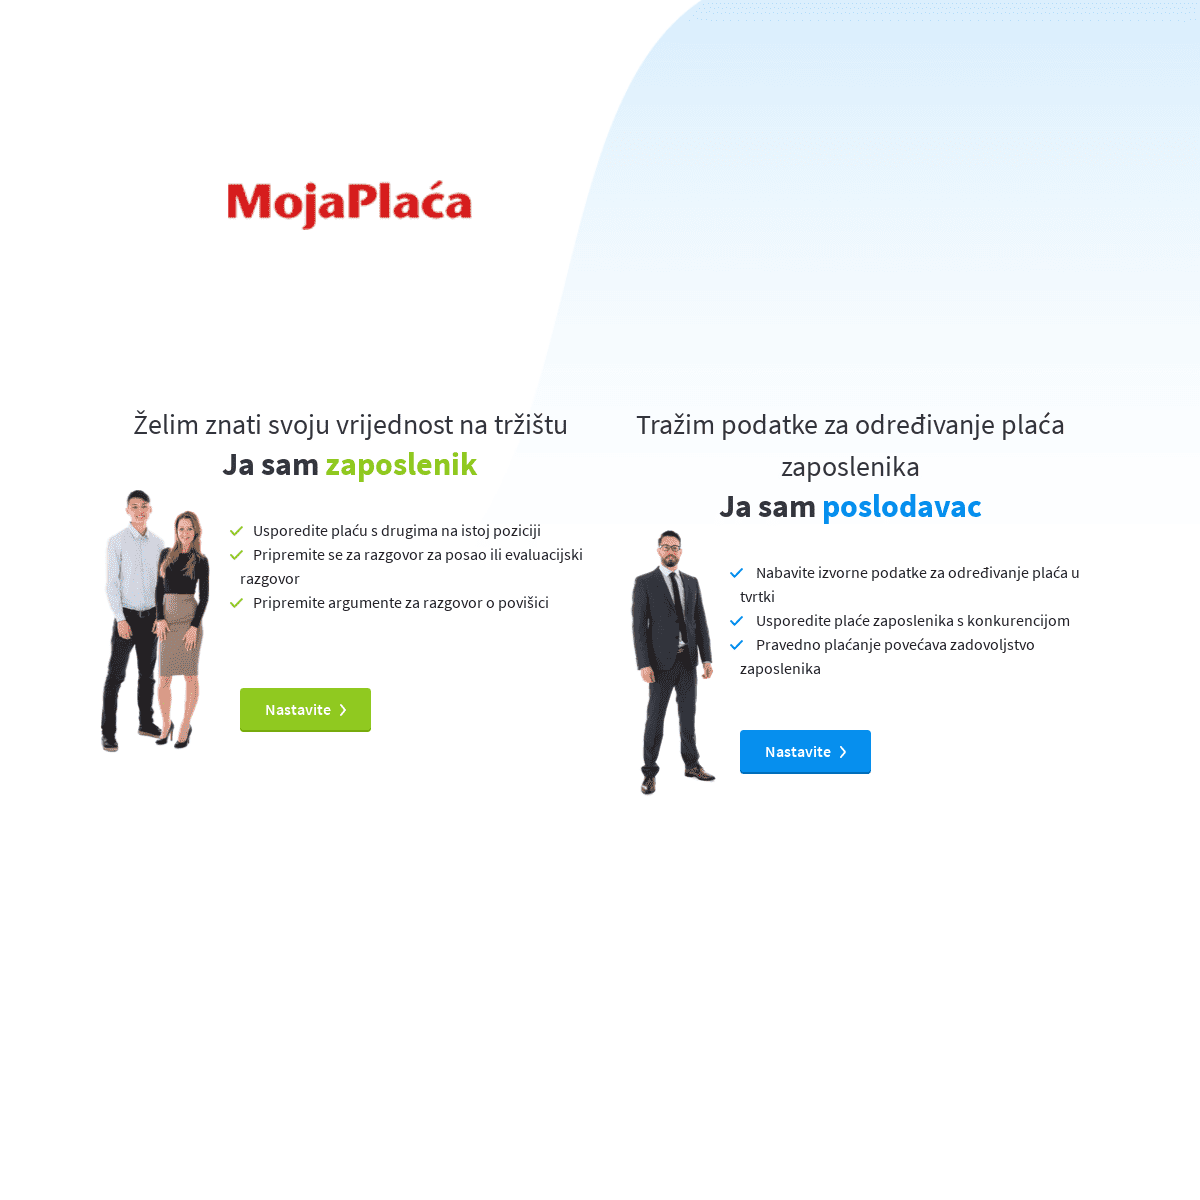 A complete backup of mojaplaca.hr